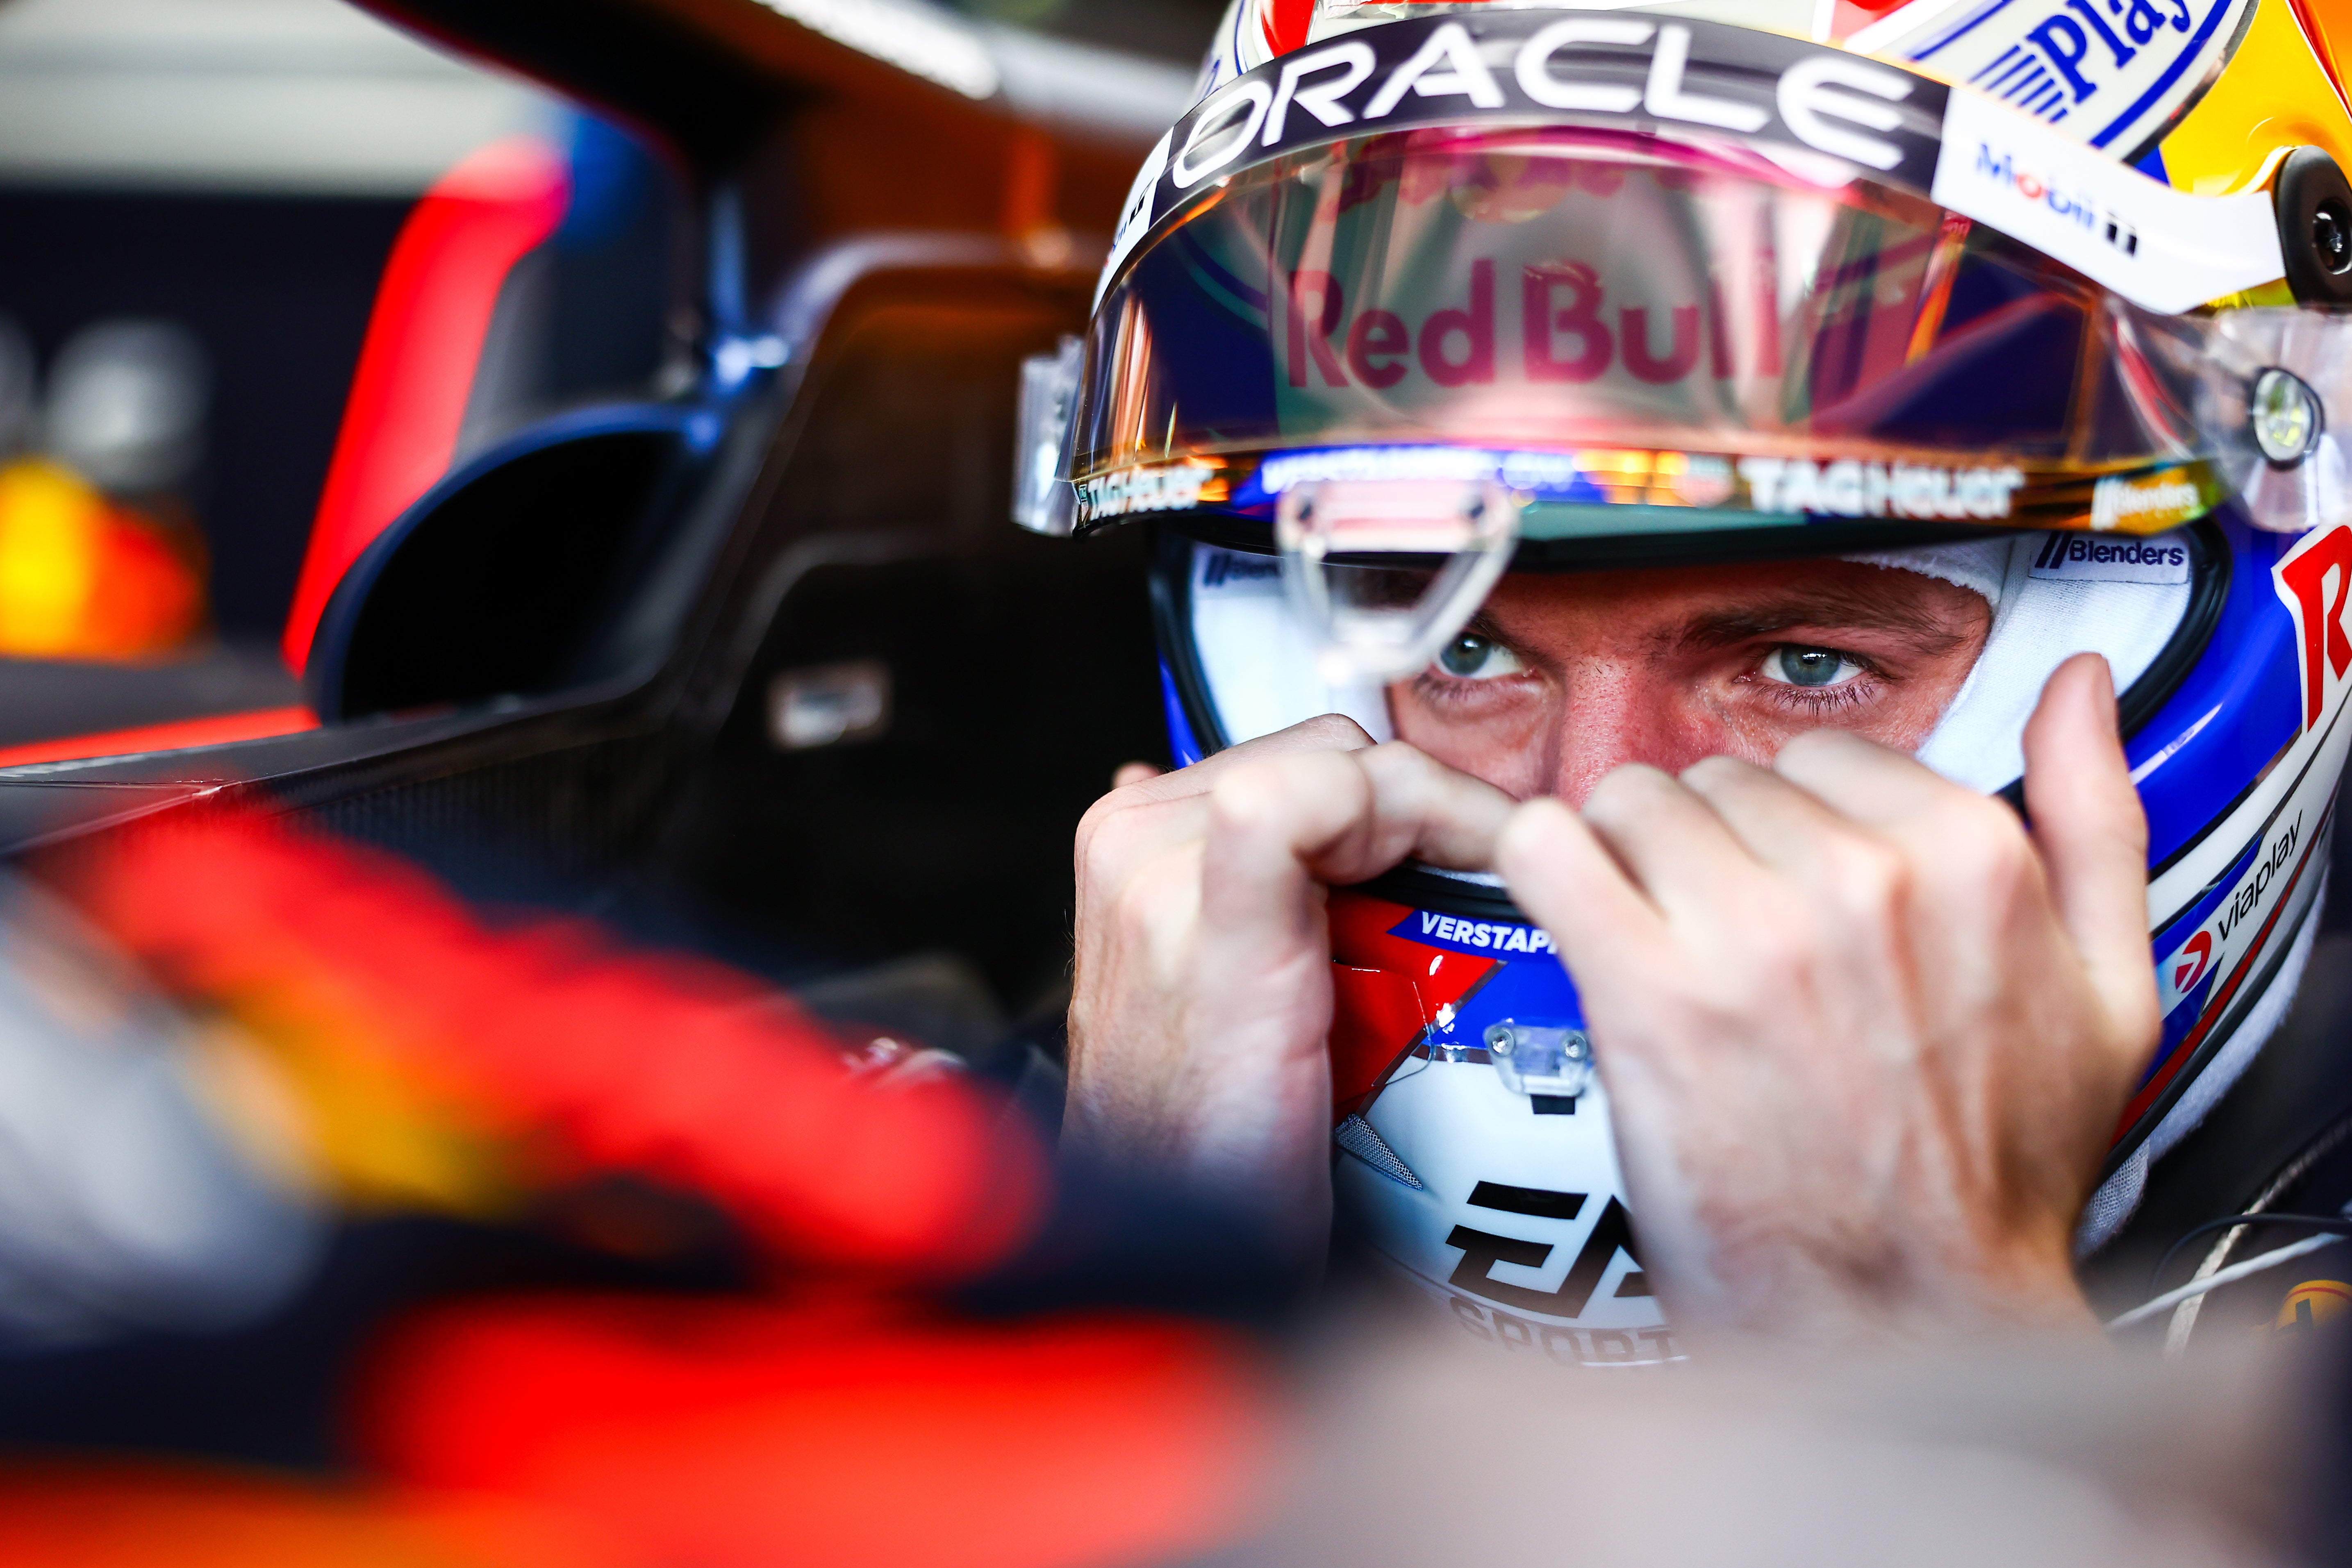 Max Verstappen was not happy with Lewis Hamilton during practice on Friday